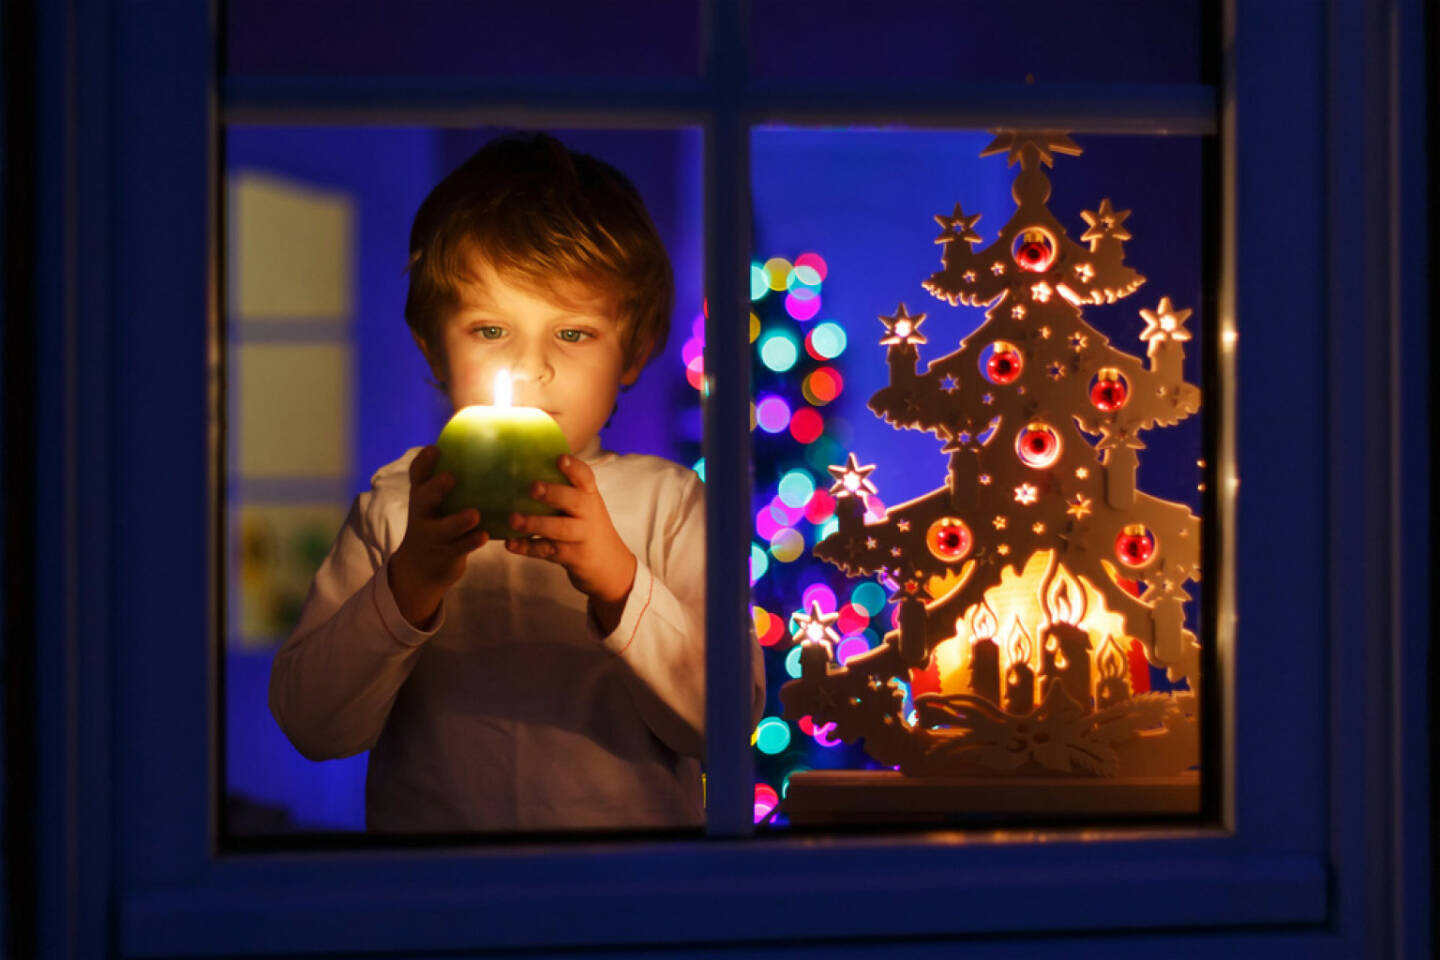 Weihnachten, Kerze, Fenster, besinnlich, Kind, http://www.shutterstock.com/de/pic-217476457/stock-photo-little-boy-standing-by-window-at-christmas-time-and-holding-candle-with-colorful-lights-from.html